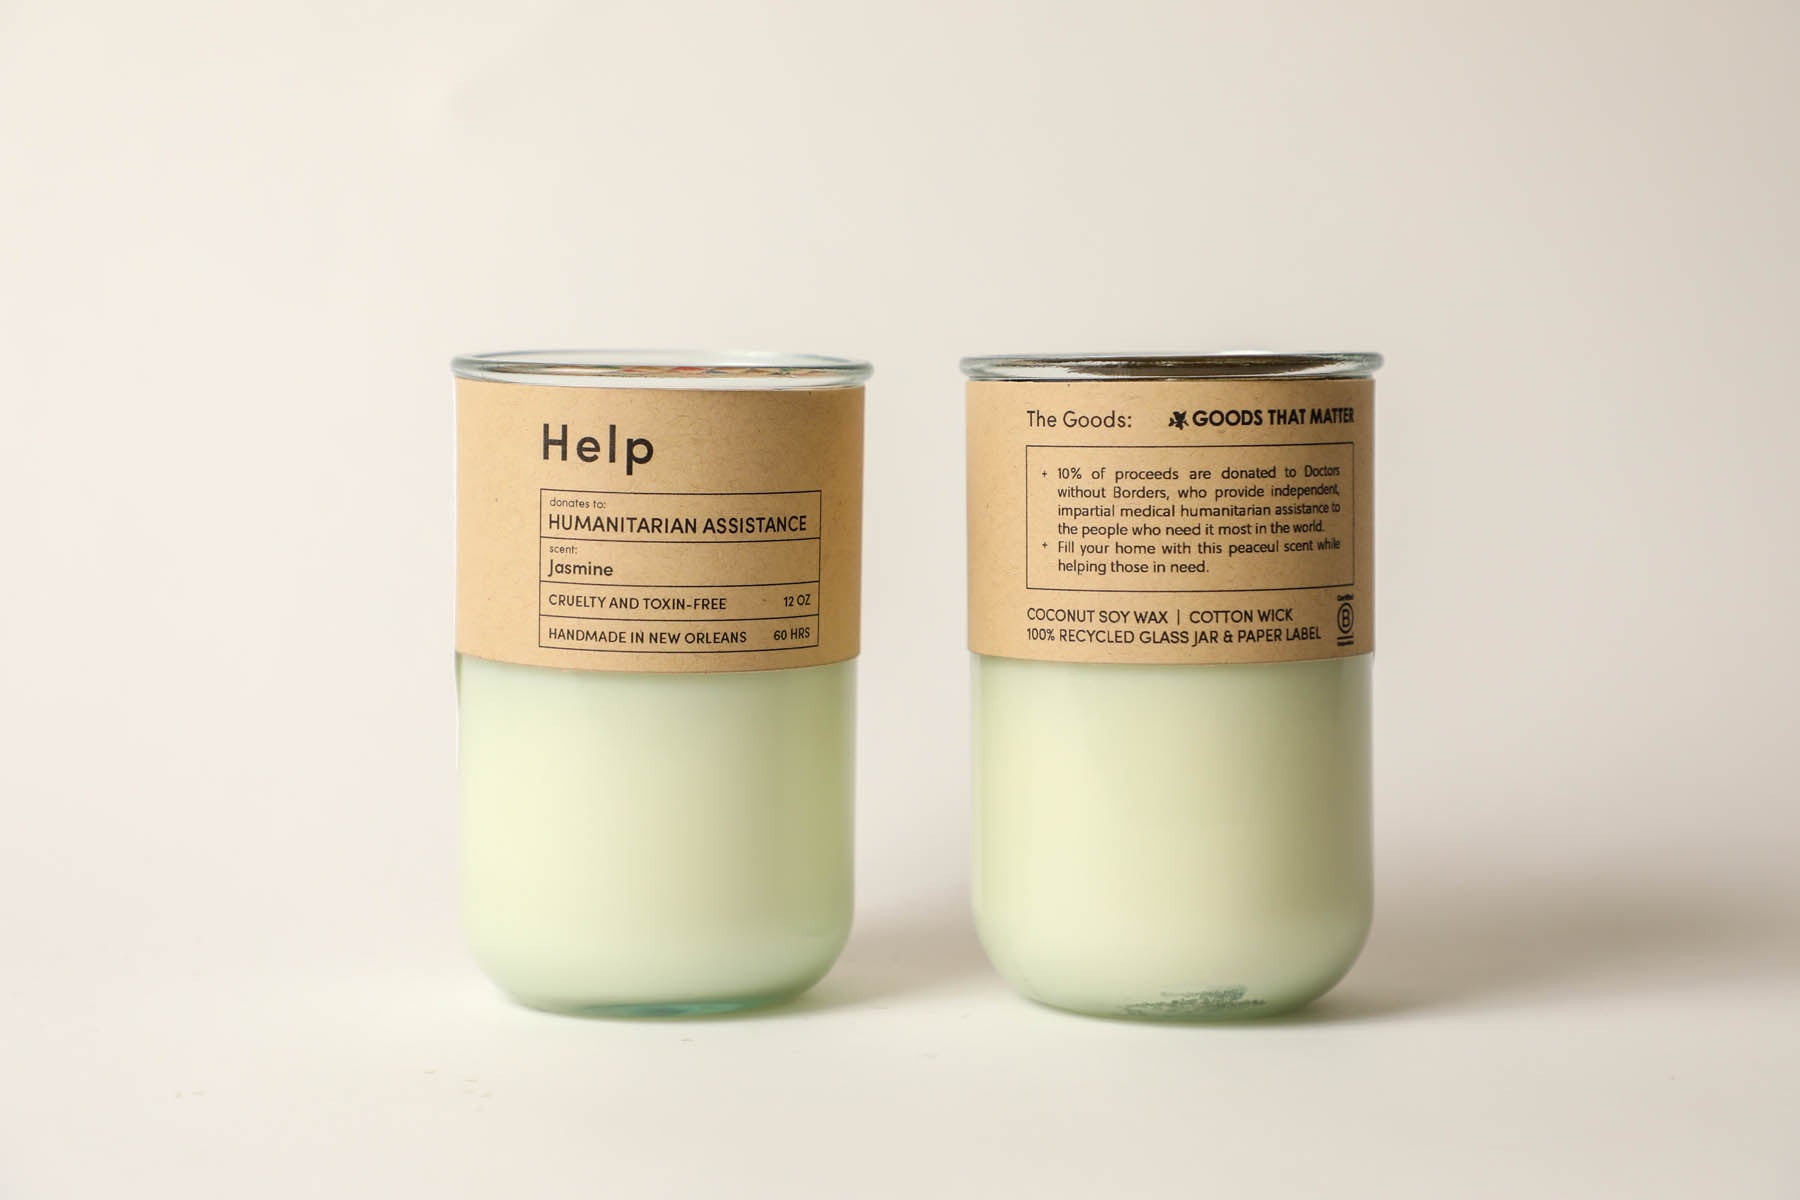 Help - Humanitarian Assistance / Jasmine Scent: Candles for Good